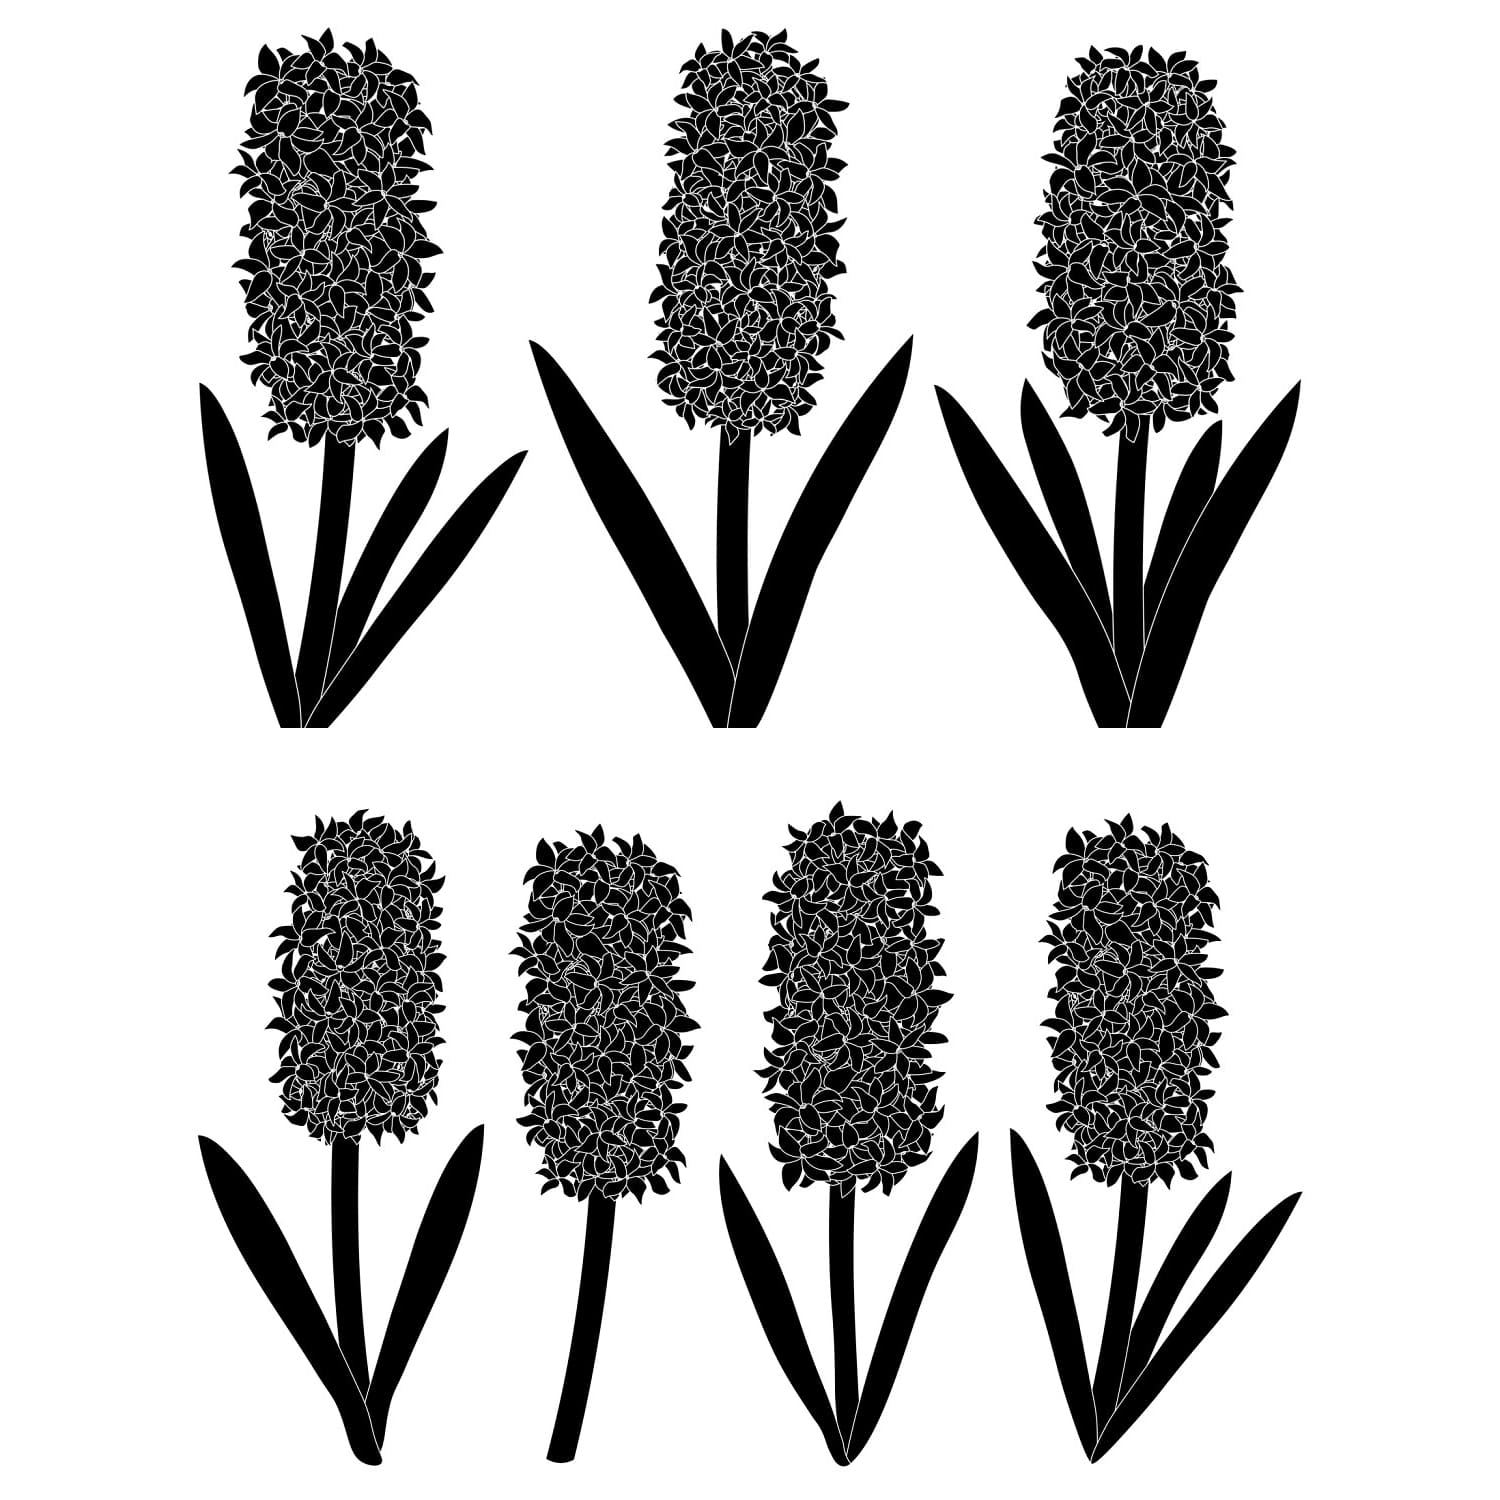 hyacinths flowers silhouettes vector illustrations.